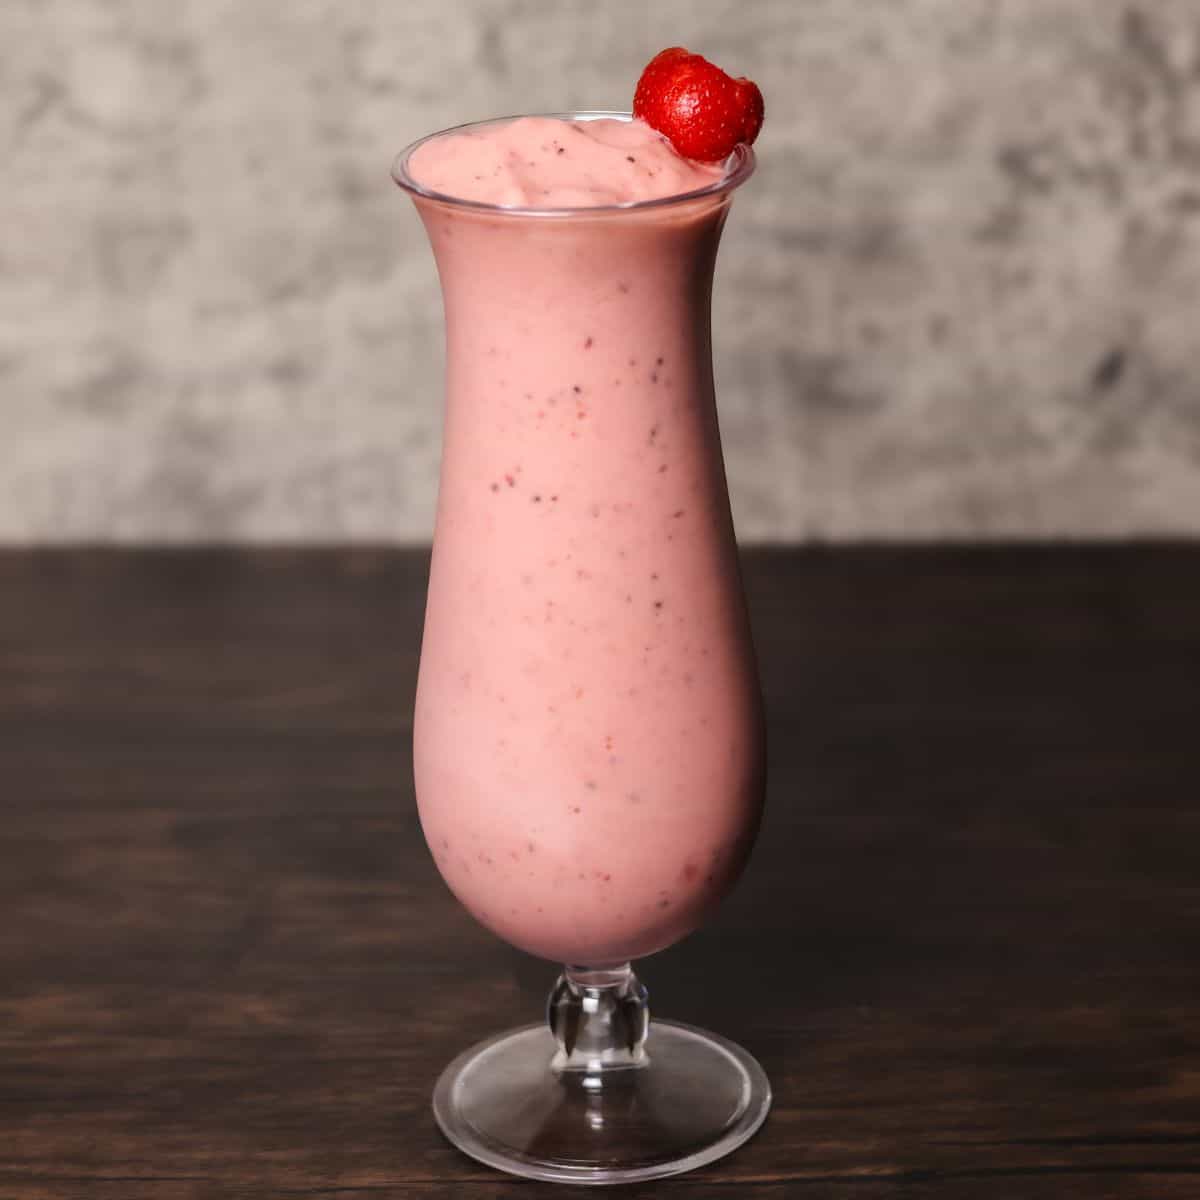 A finished kiwi quencher smoothie served in a tall, frosted glass garnished with a strawberry on the rim, against a dark background.